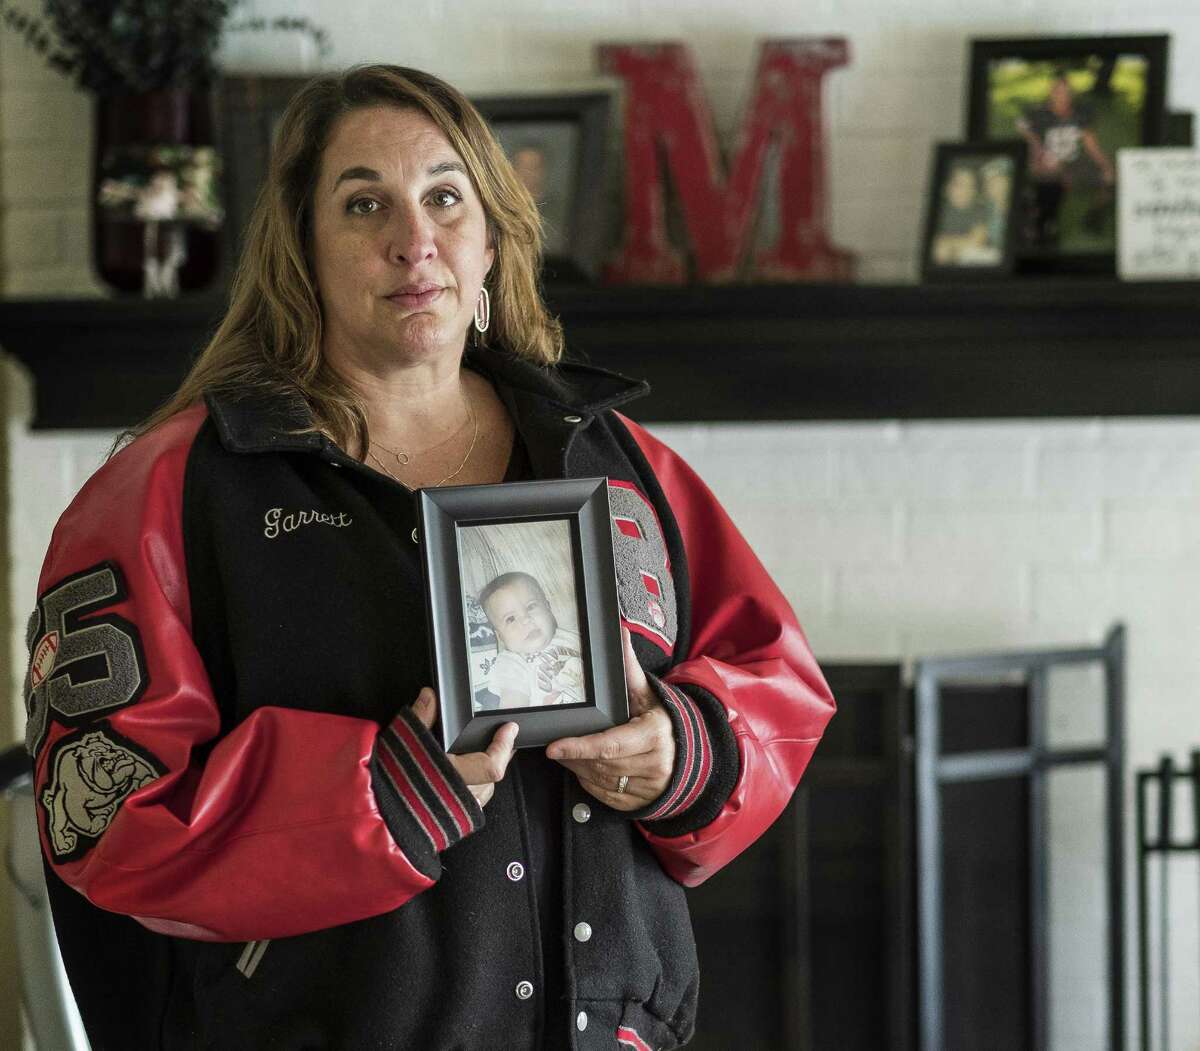 September 23, 2016 - Sherene Mayner, mother of Garrett McKinney wearing her son's letterman jacket holds a baby picture of him at her home in Austin, Texas, on Friday, Sept. 23, 2016. Mayner's son McKinney was shot and killed by a DPS Trooper in Paris, Texas, on September 21, 2015, after an altercation. McKinney, was a former Bowie high school football payer, and also diagnosed with schizophrenia. (AUSTIN AMERICAN-STATESMAN / RODOLFO GONZALEZ)